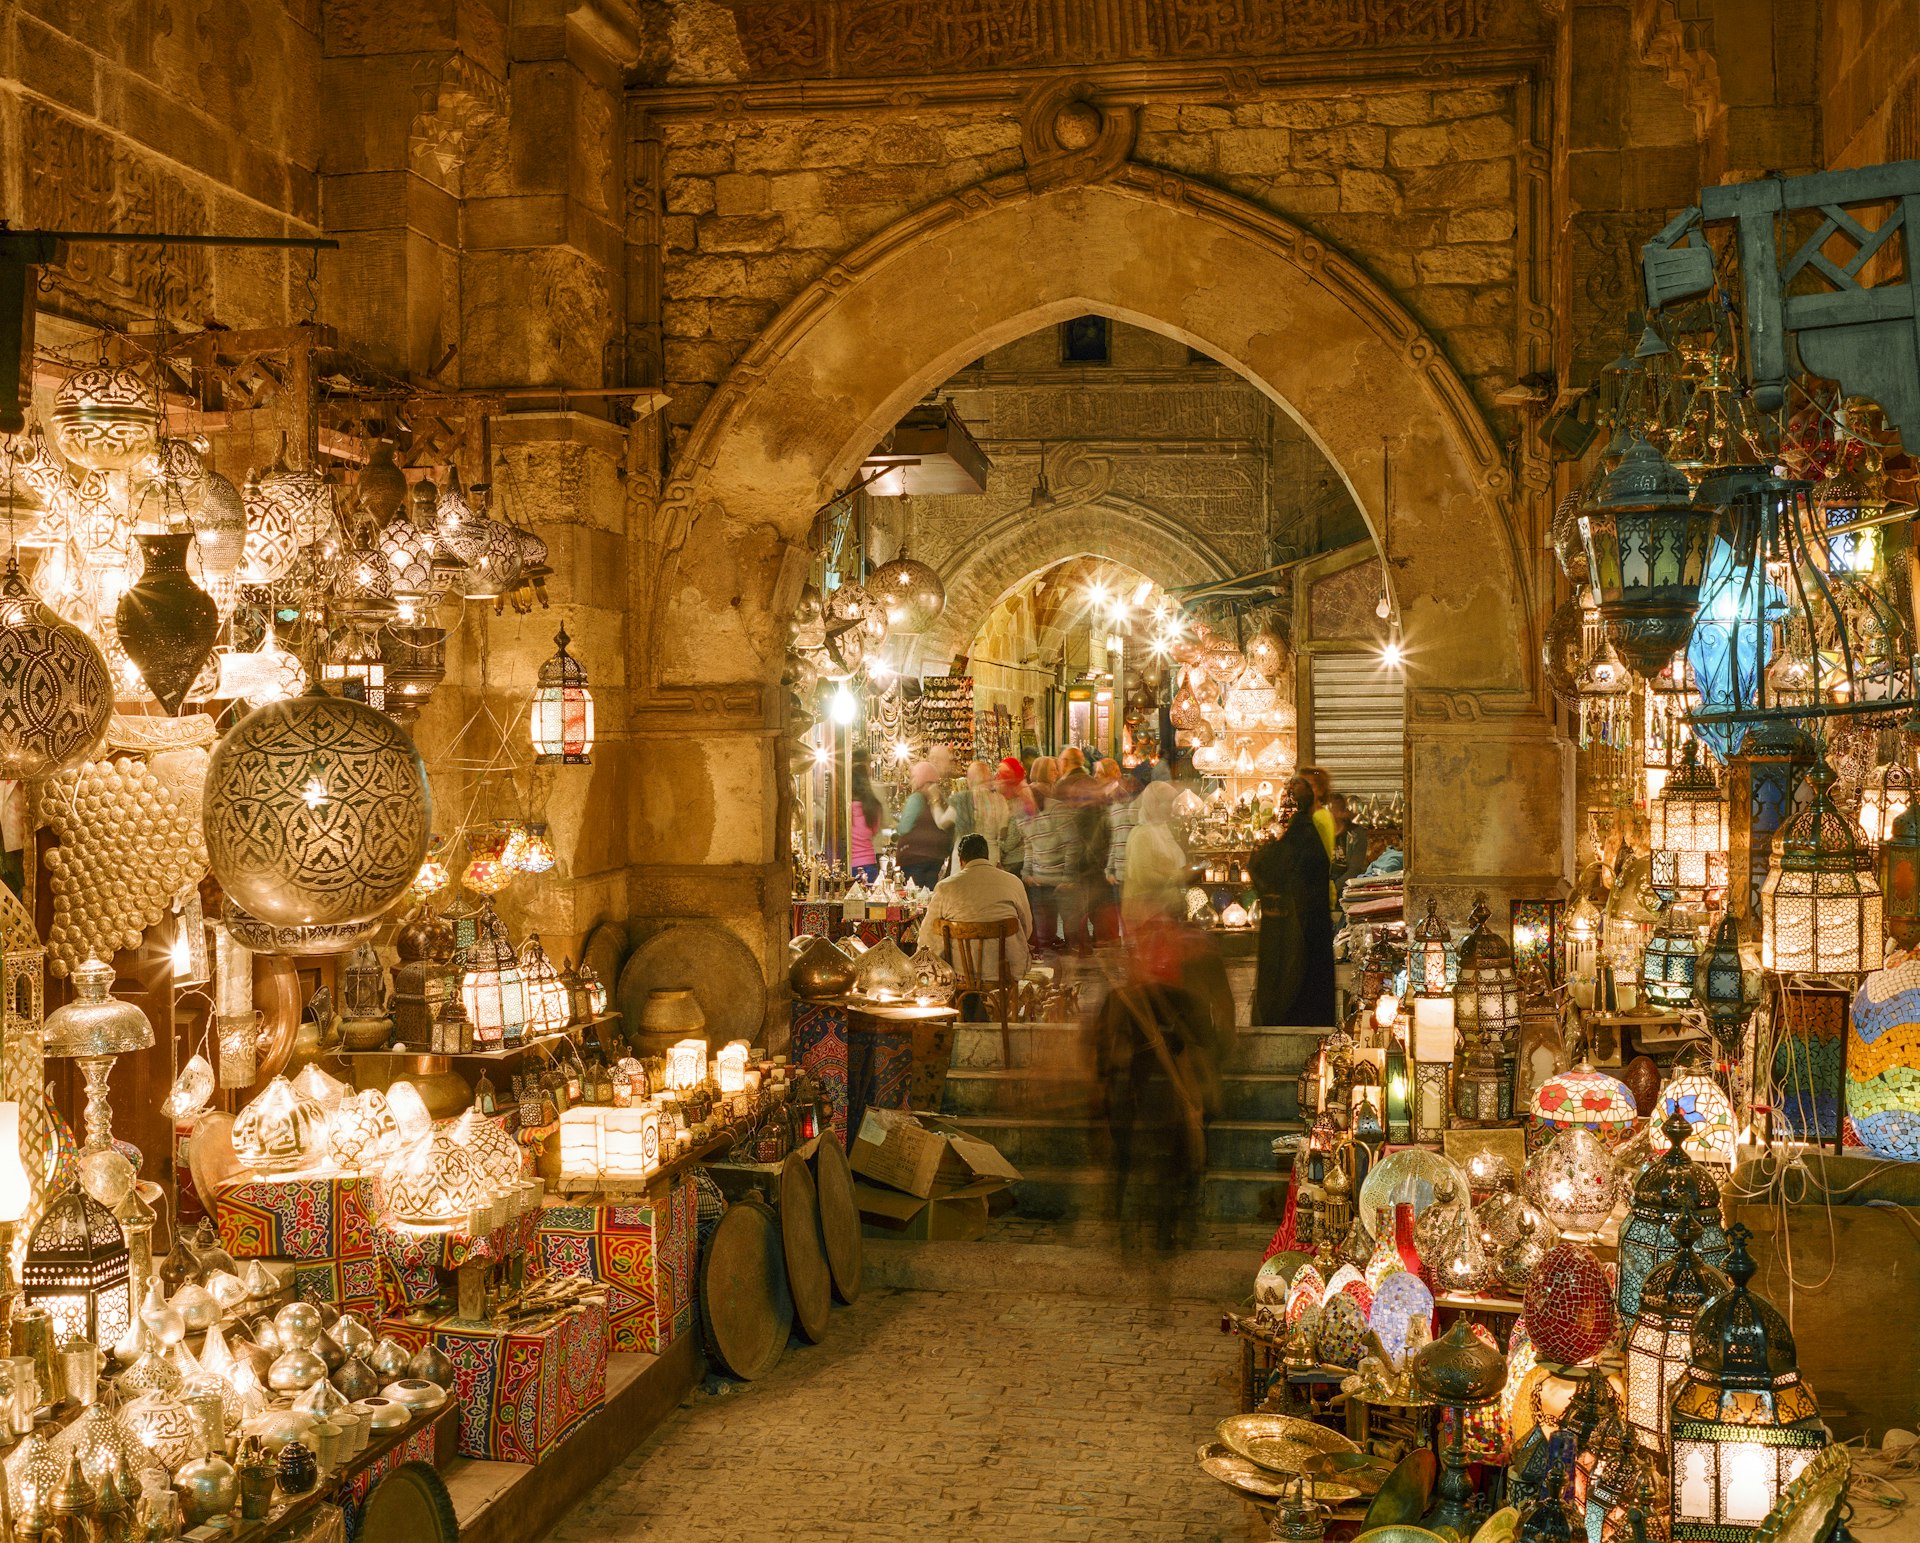 People walk down alleyways lit with intricate lamps in a busy marketplace